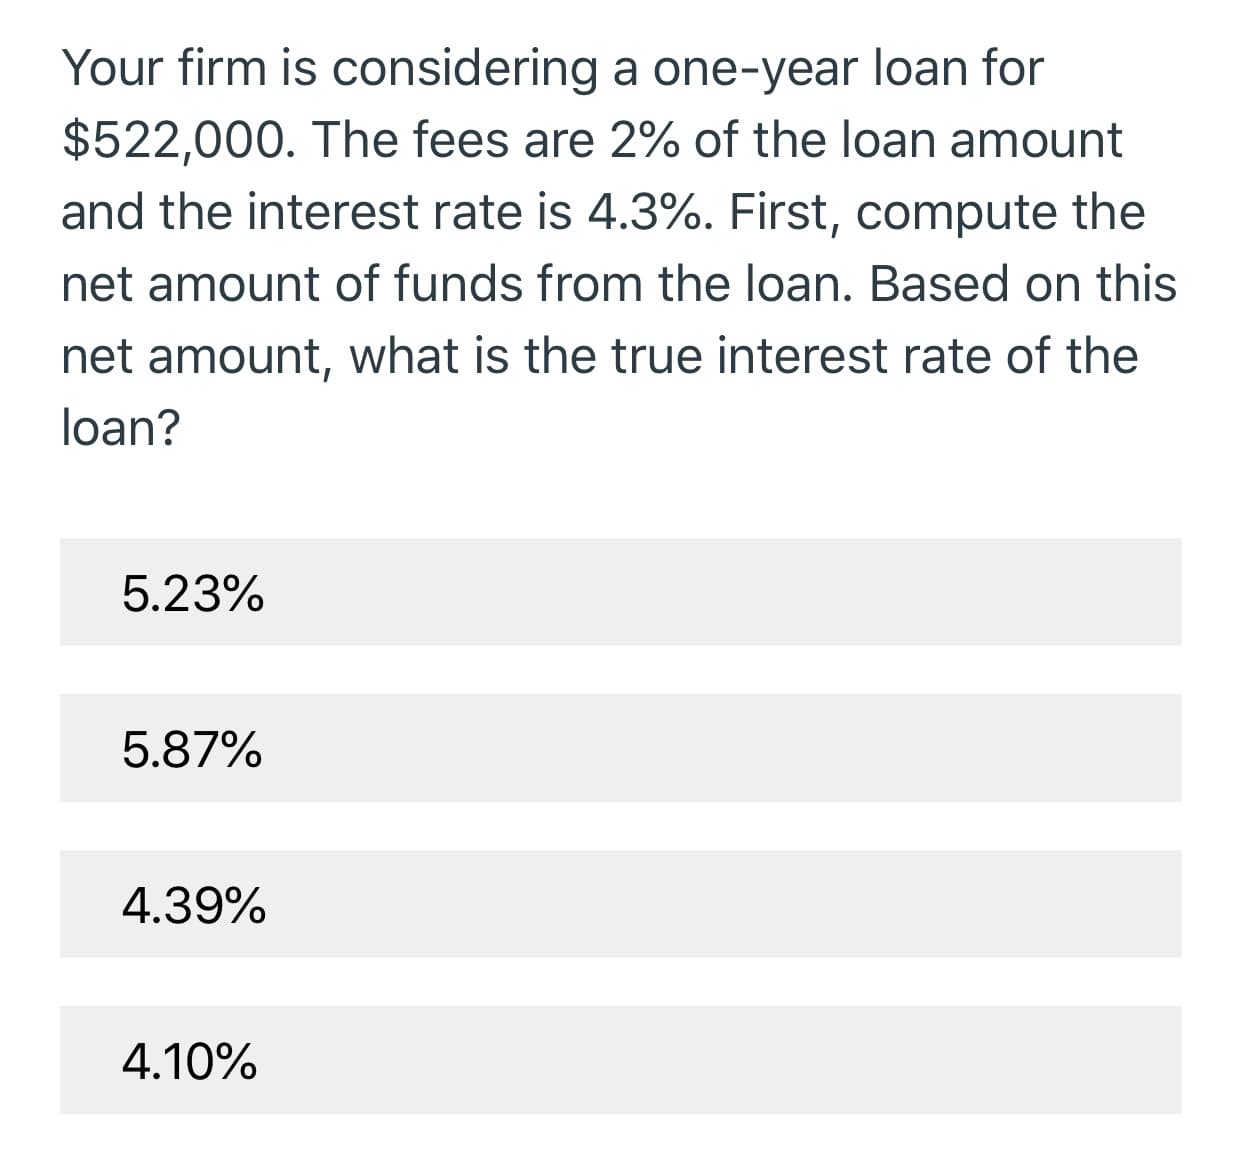 Your firm is considering a one-year loan for
$522,000. The fees are 2% of the loan amount
and the interest rate is 4.3%. First, compute the
net amount of funds from the loan. Based on this
net amount, what is the true interest rate of the
loan?
5.23%
5.87%
4.39%
4.10%
